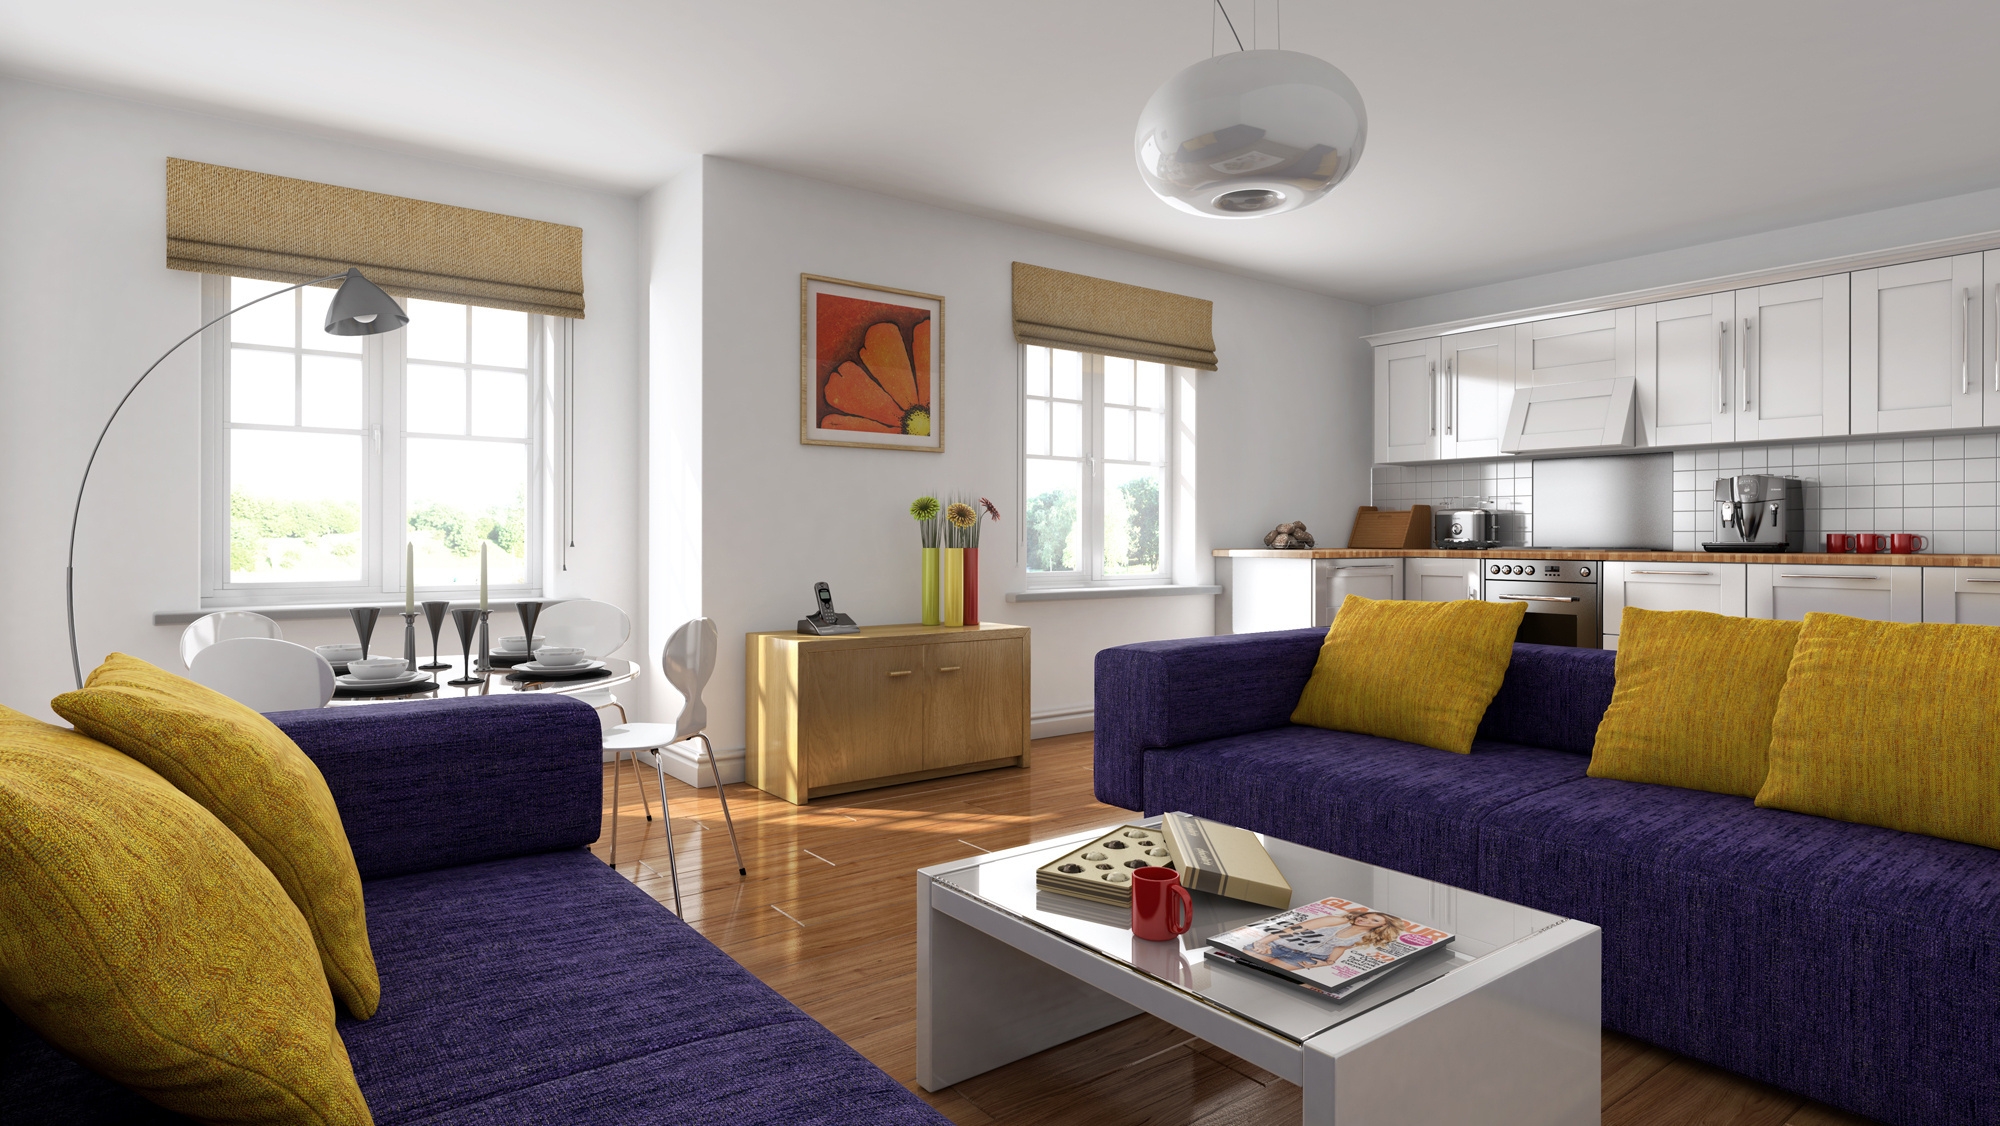 android interior, miscellanea, miscellaneous, furniture, modern, up to date, living room, sofas